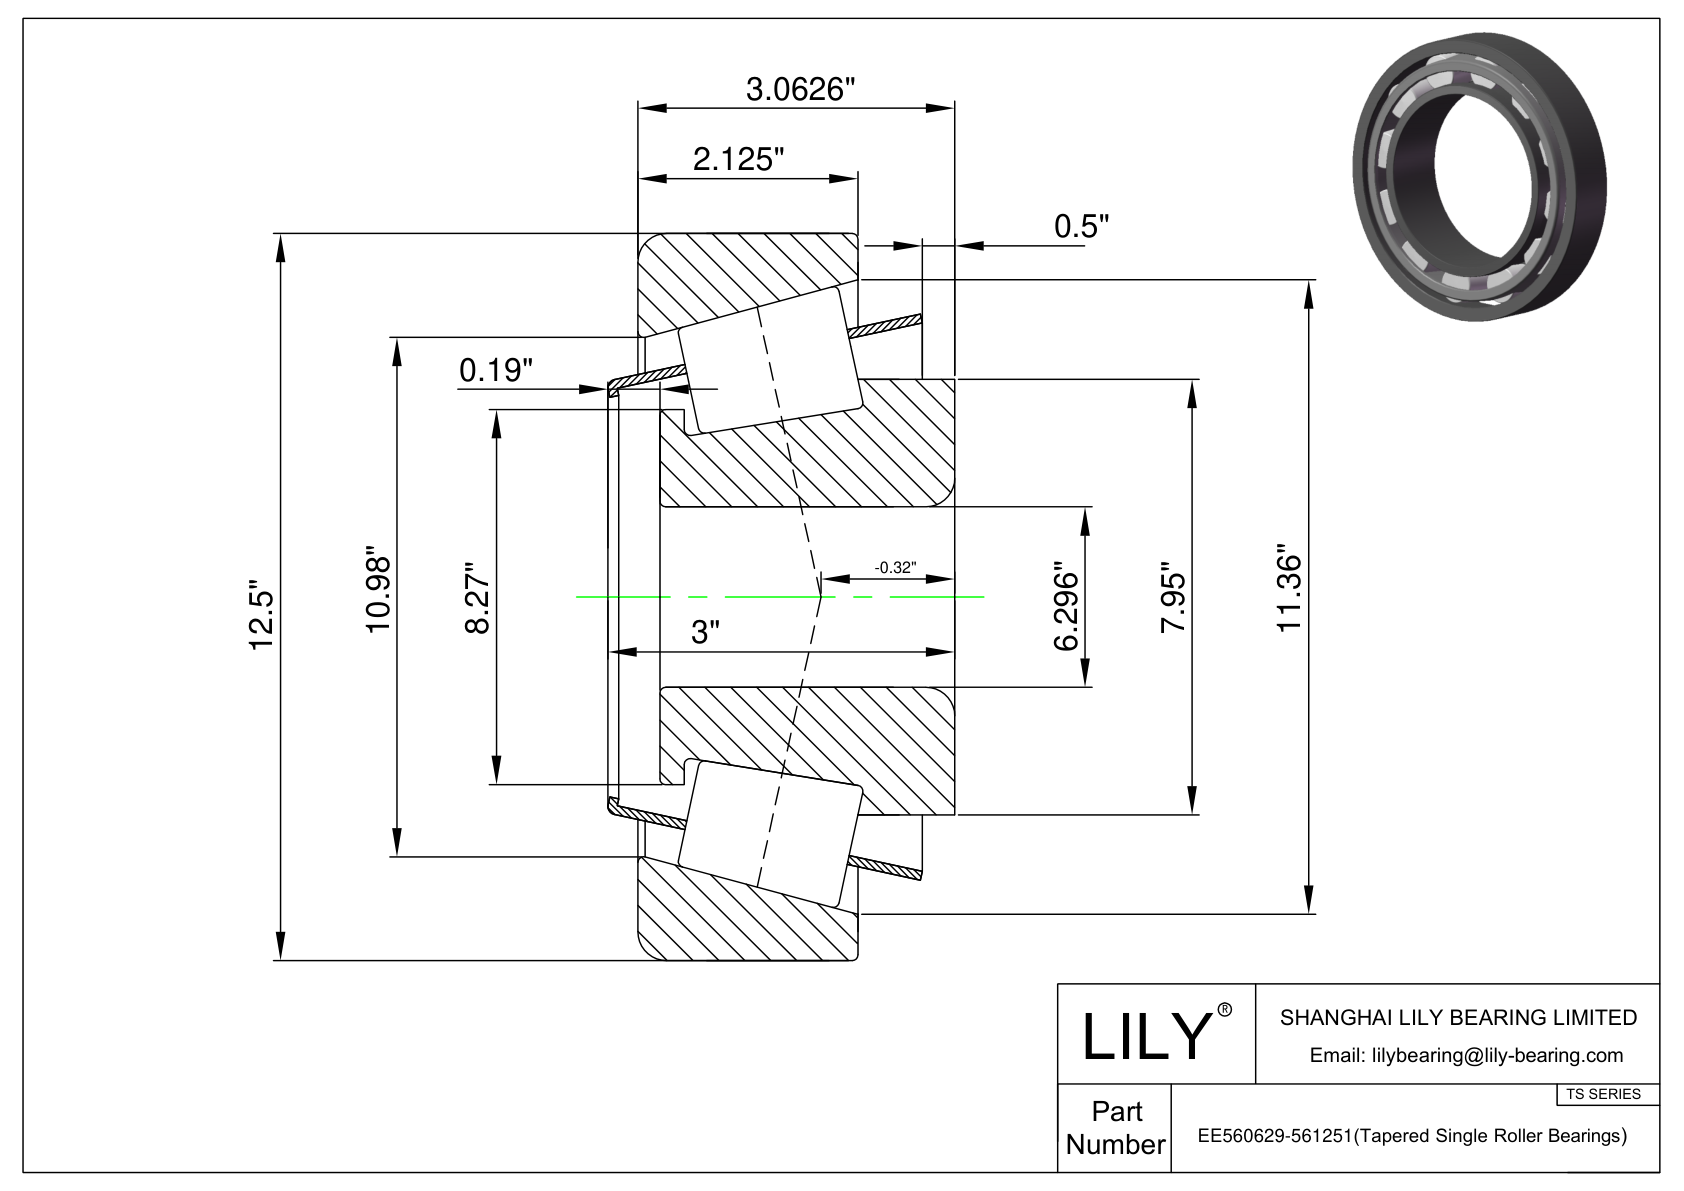 EE560629-561251 TS (Tapered Single Roller Bearings) (Imperial) cad drawing